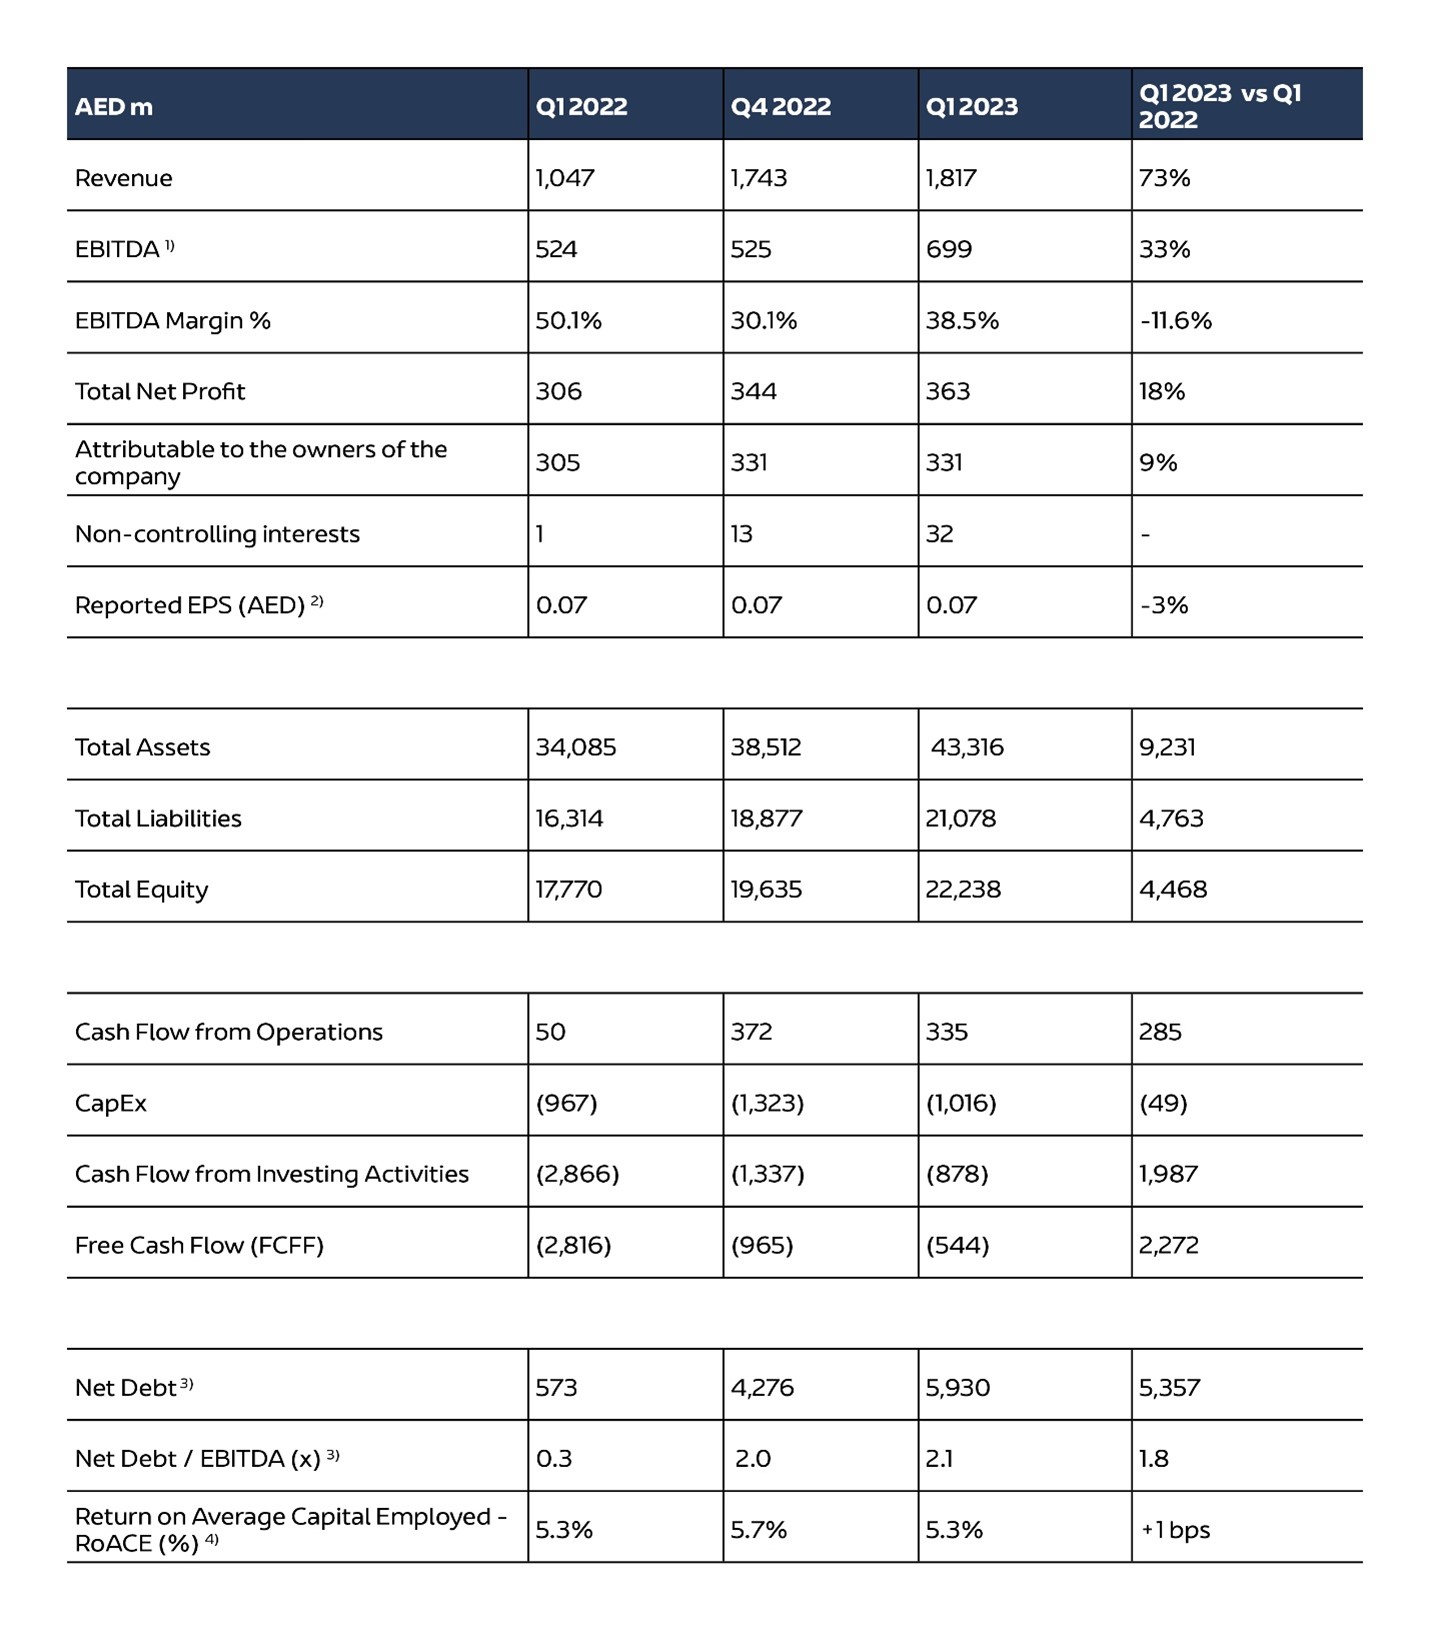 AD Ports Group - Summarised Consolidated Financial Results in Q1 2023